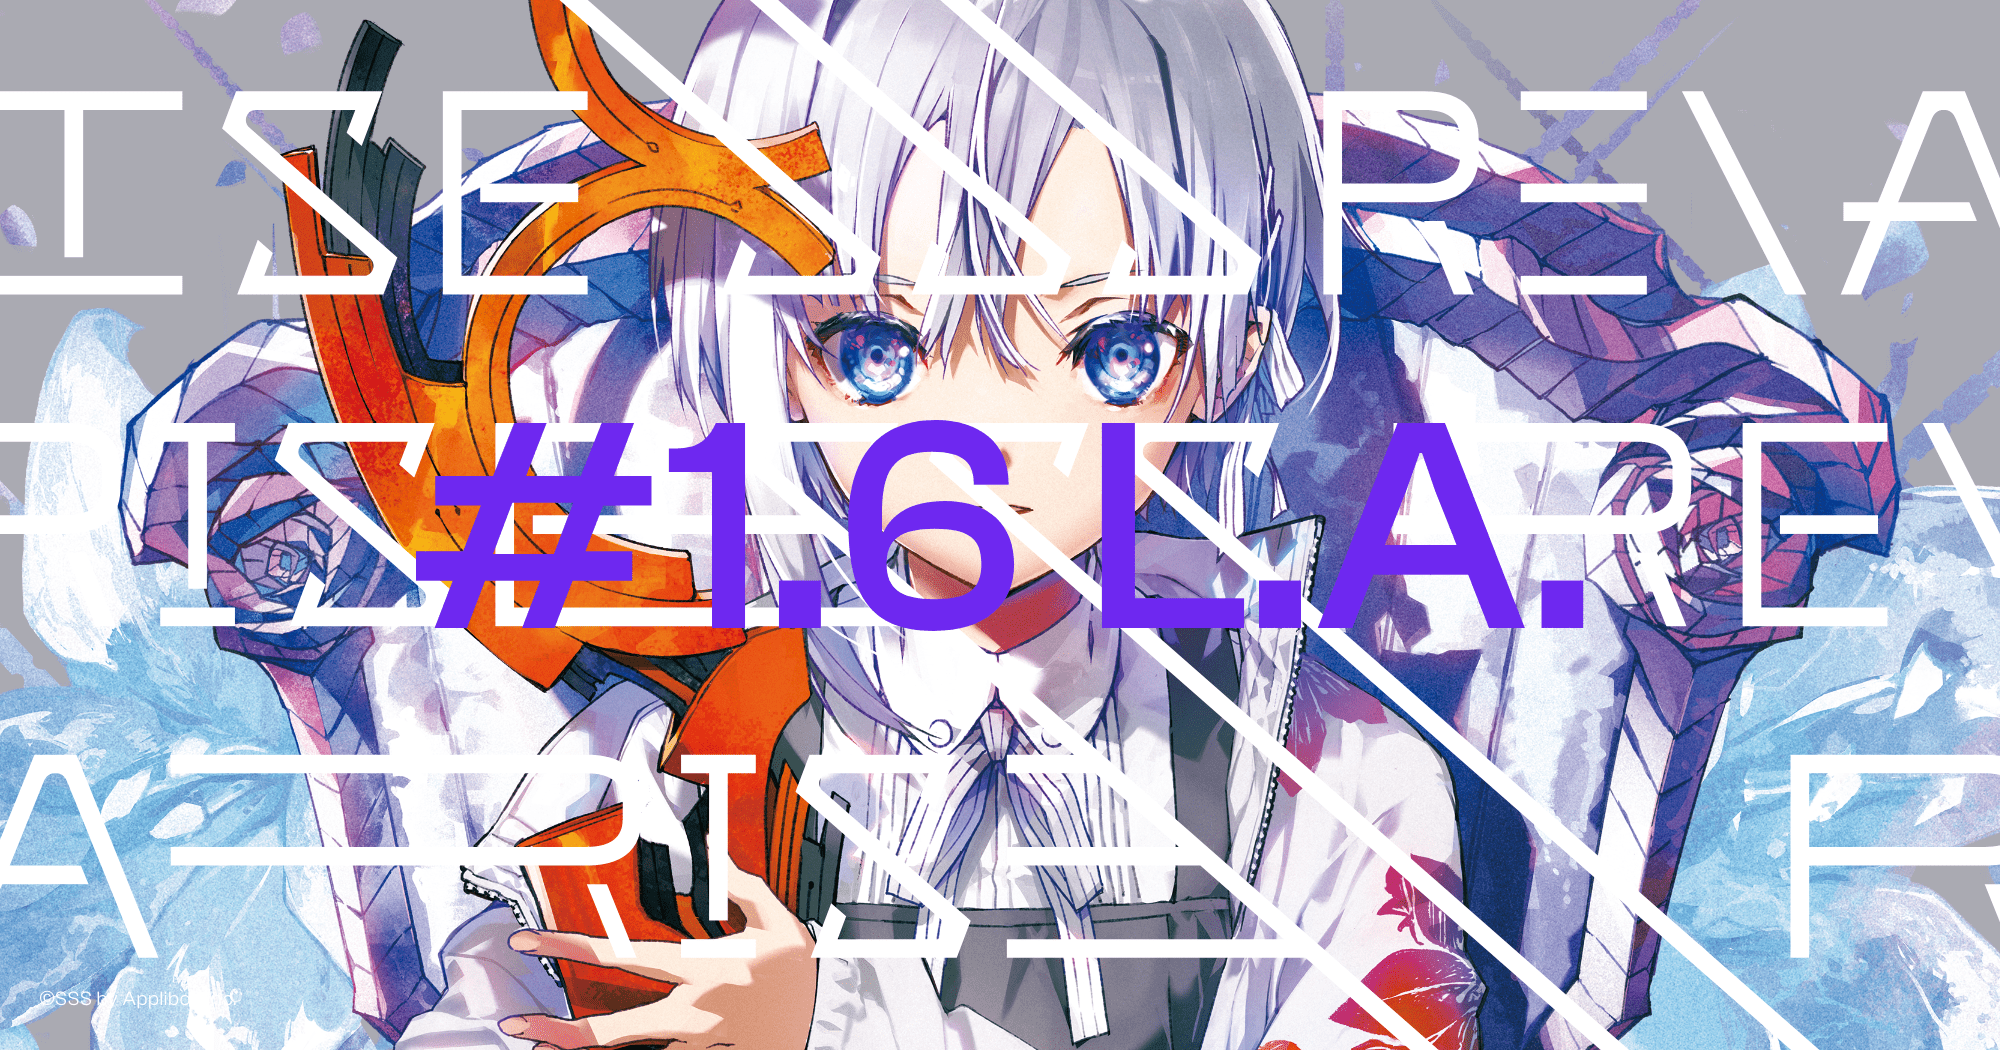 pixiv to sponsor 'SSS by applibot' exhibition 'Re\arise #1.6 EXHIBITION  L.A.' featuring members BUNBUN, Mai Yoneyama, and PALOW